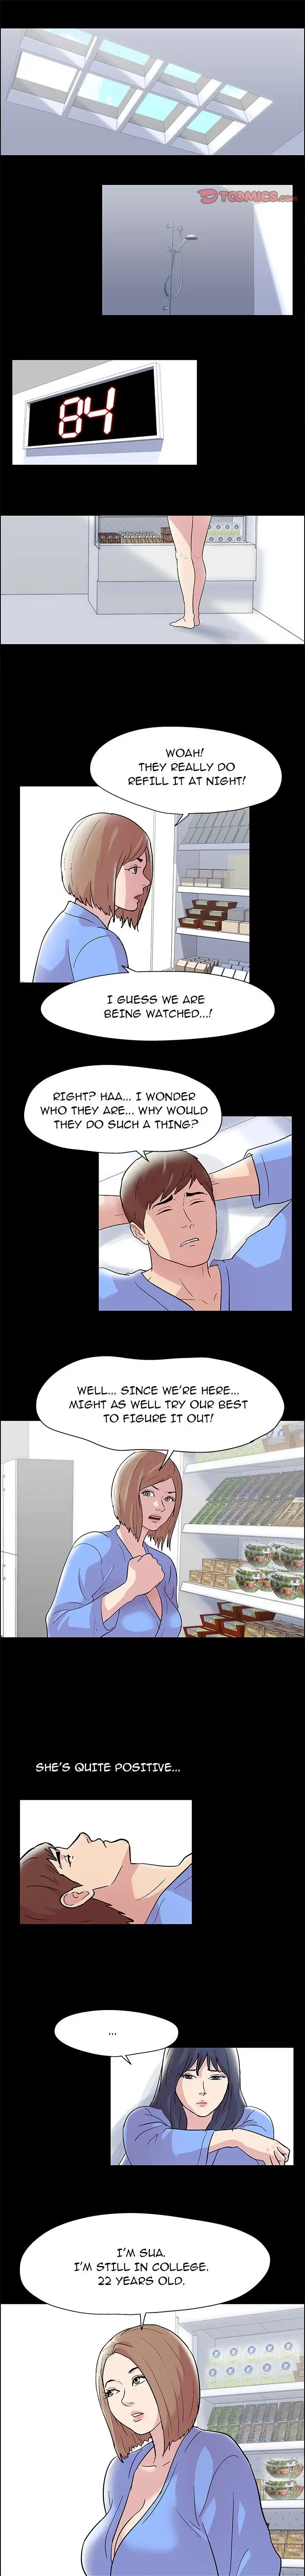 The White Room - Chapter 11 Page 1